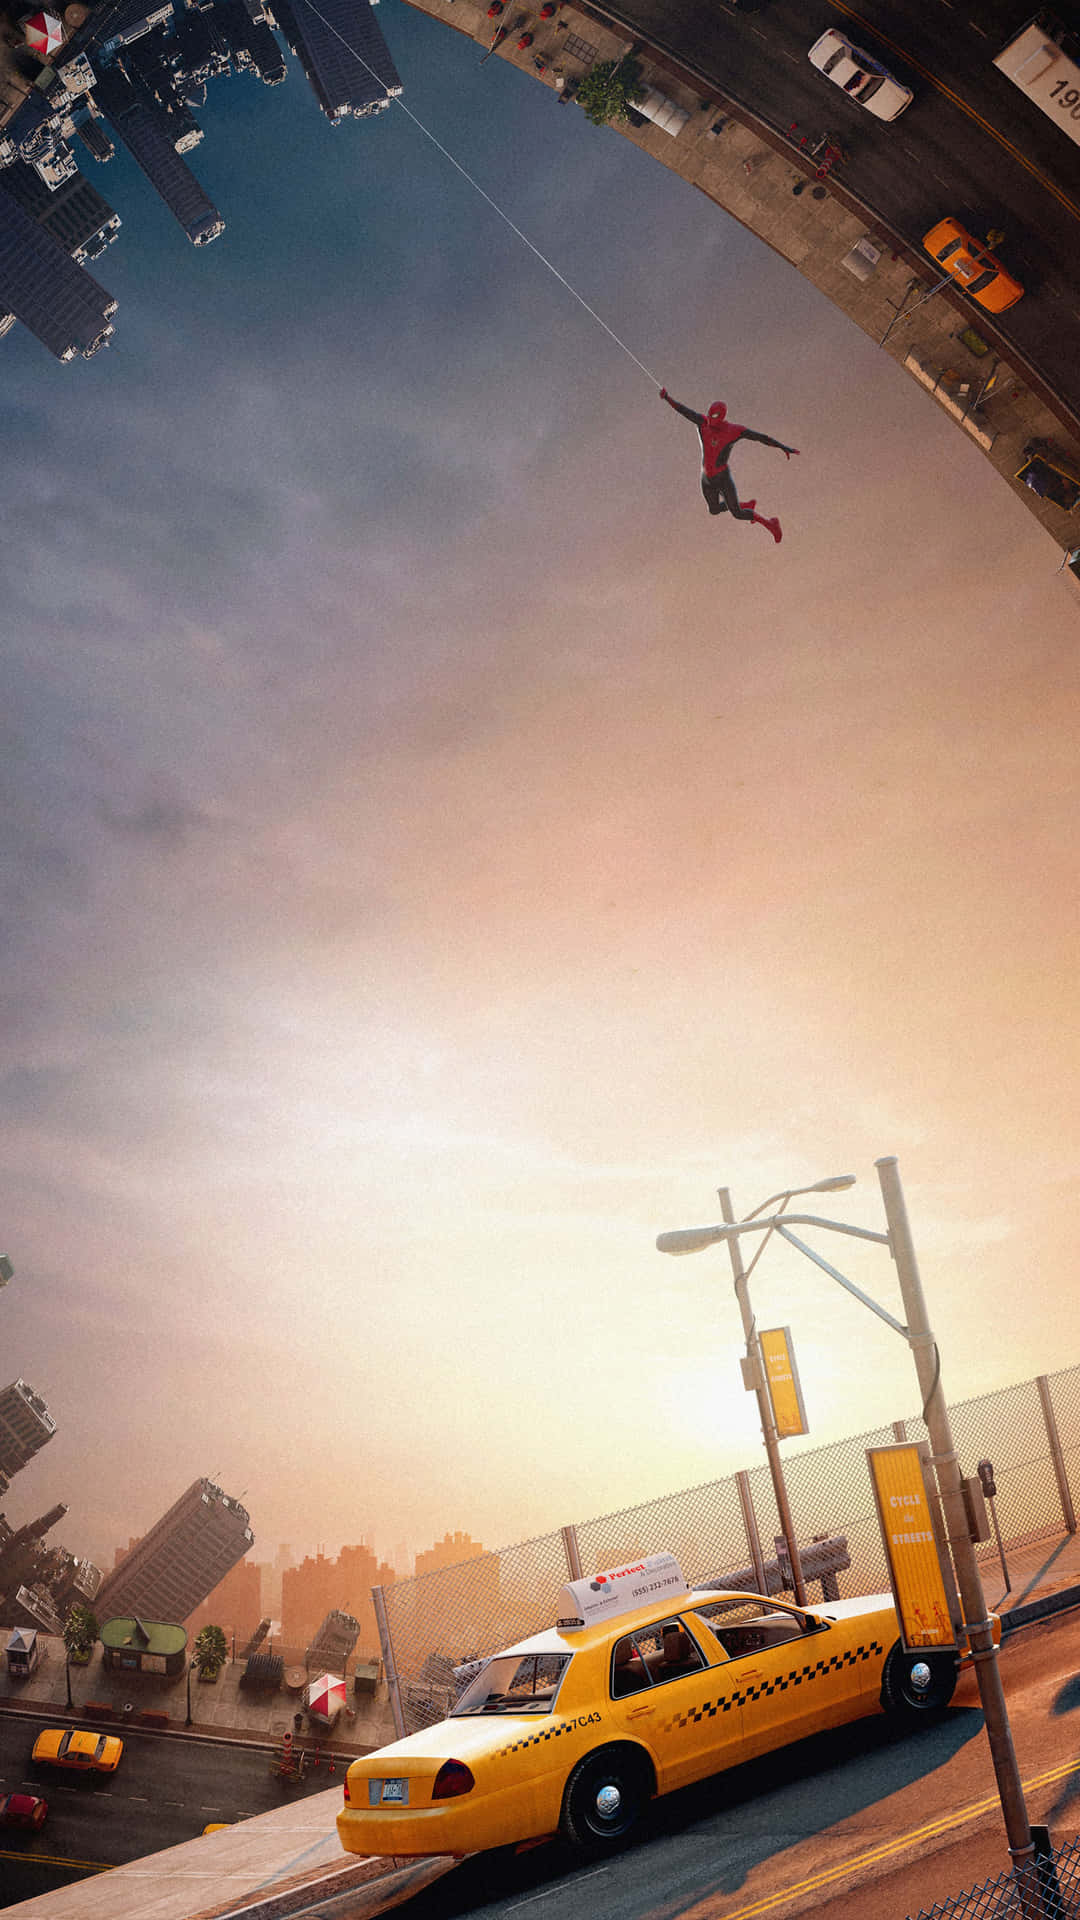 Spiderman crawling through the city streets, ready for whatever comes his way.